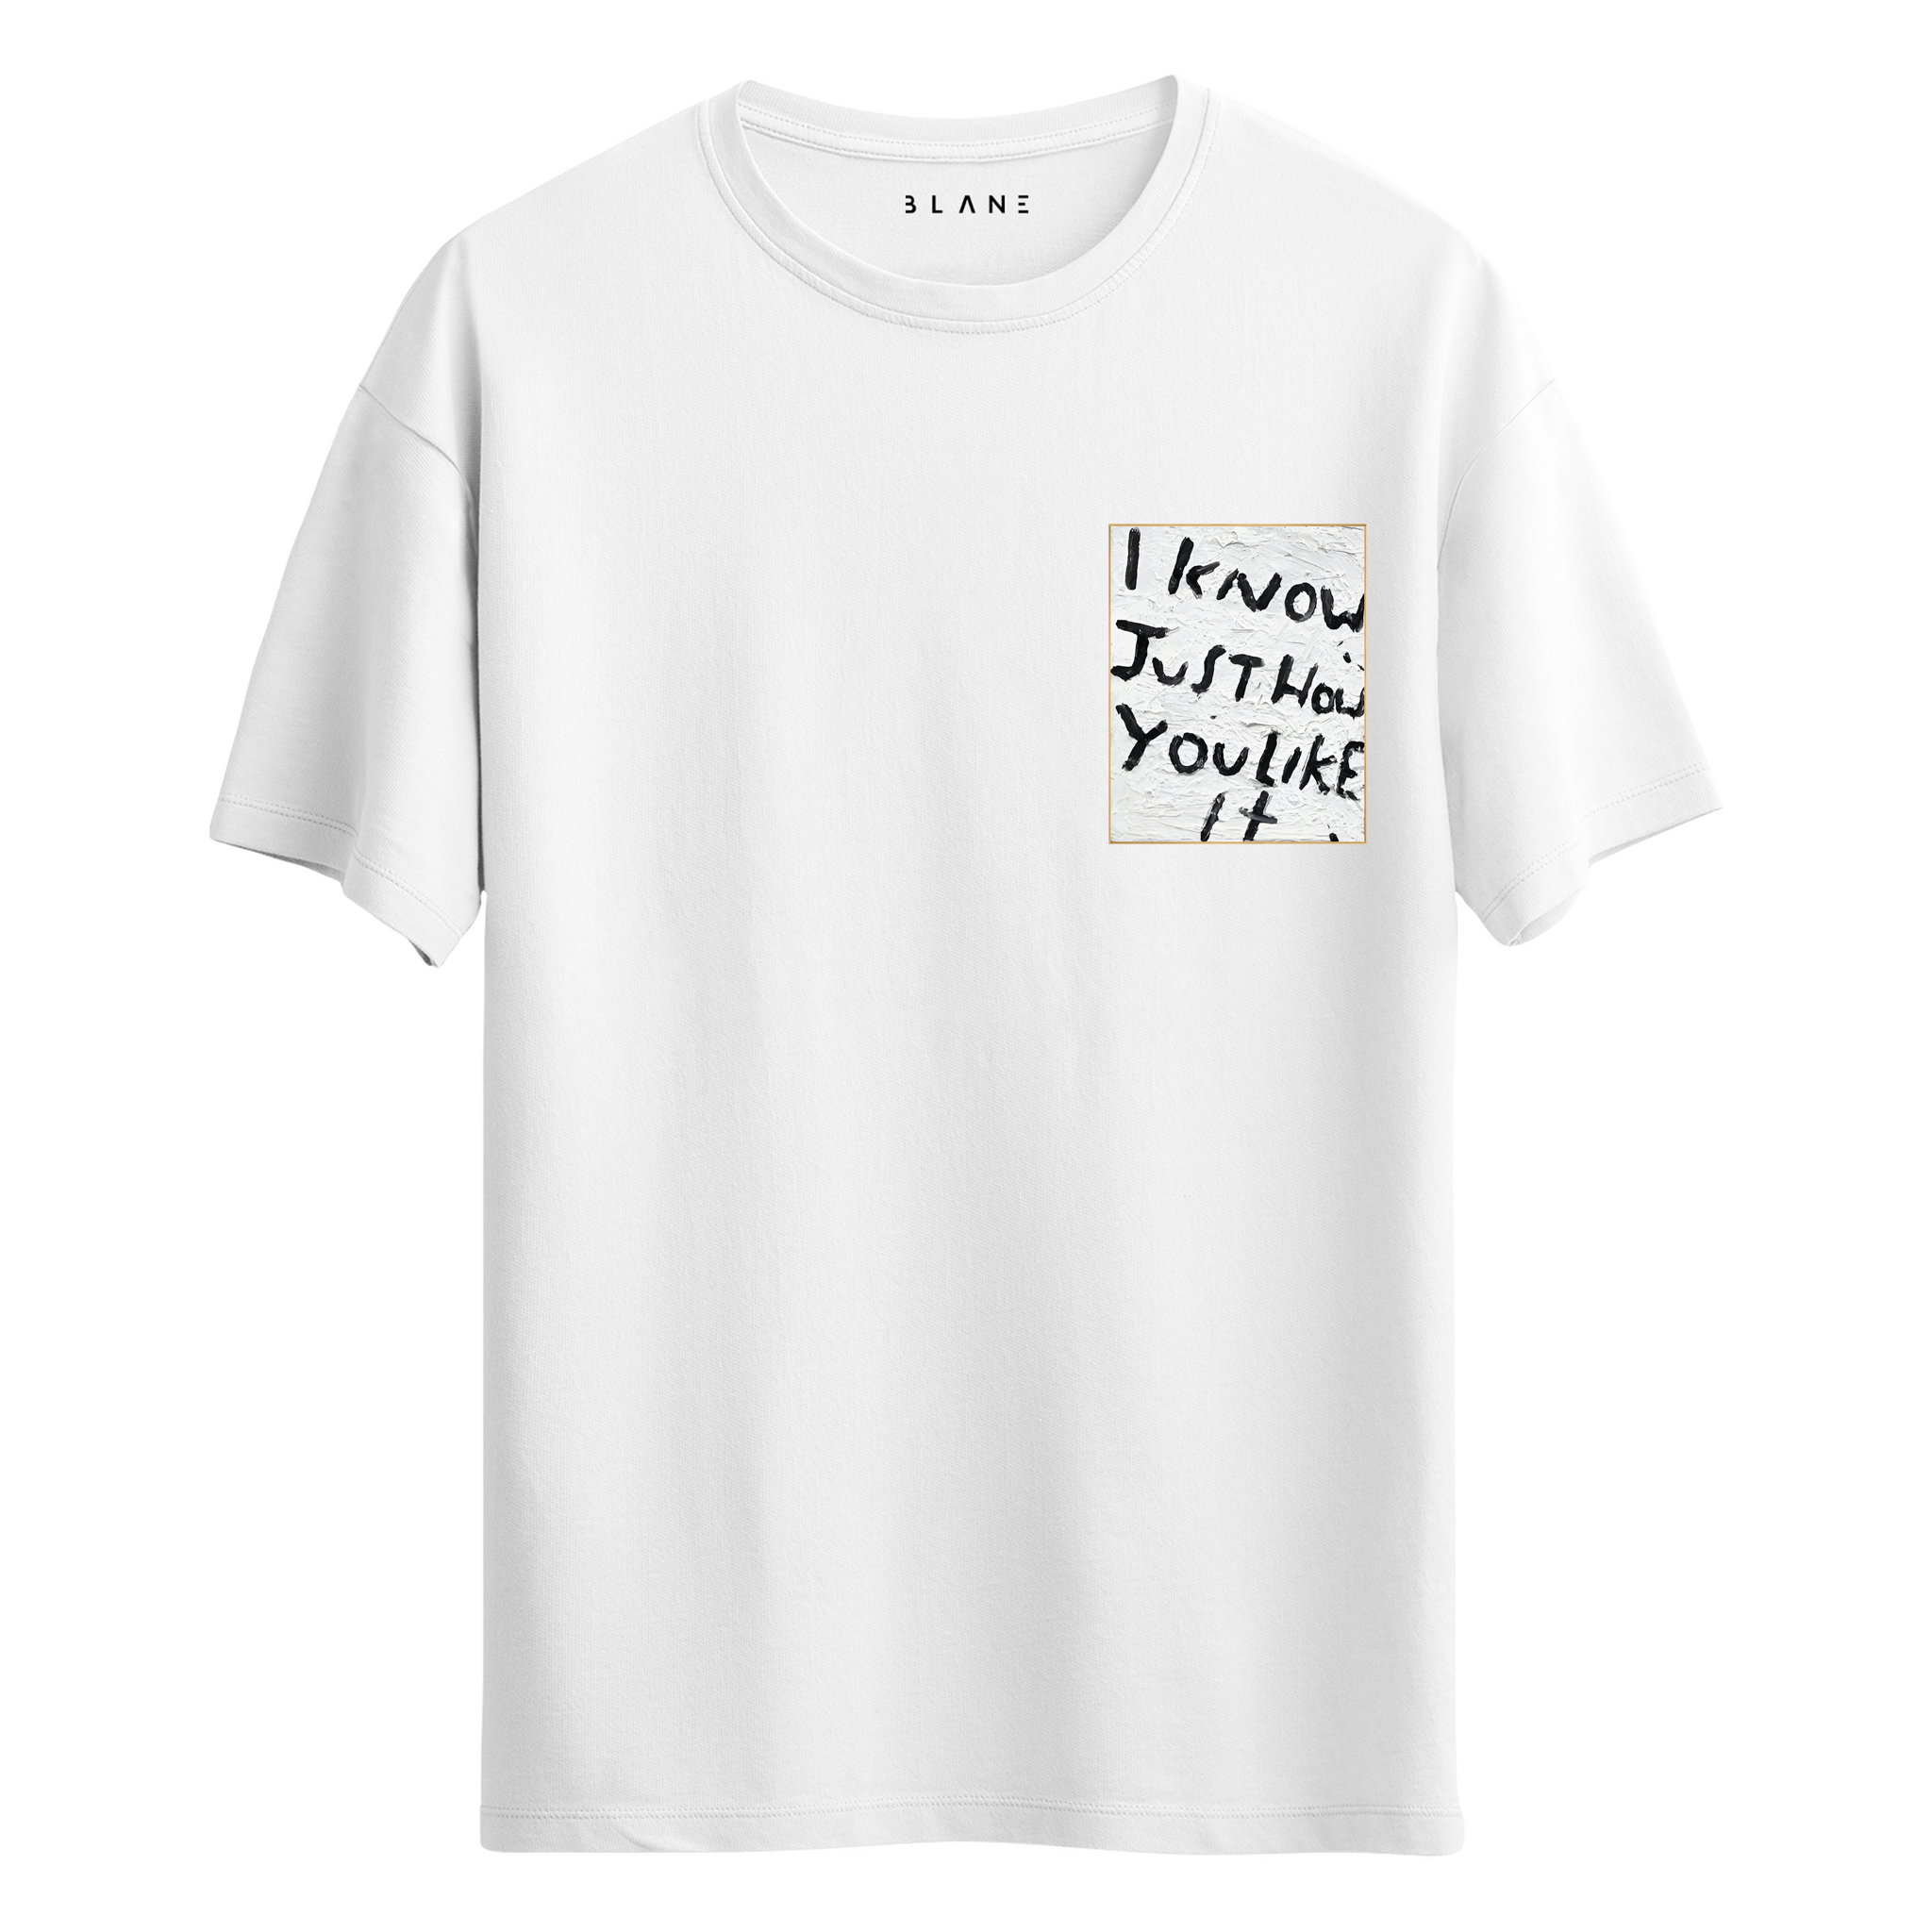 I Just Know - T-Shirt